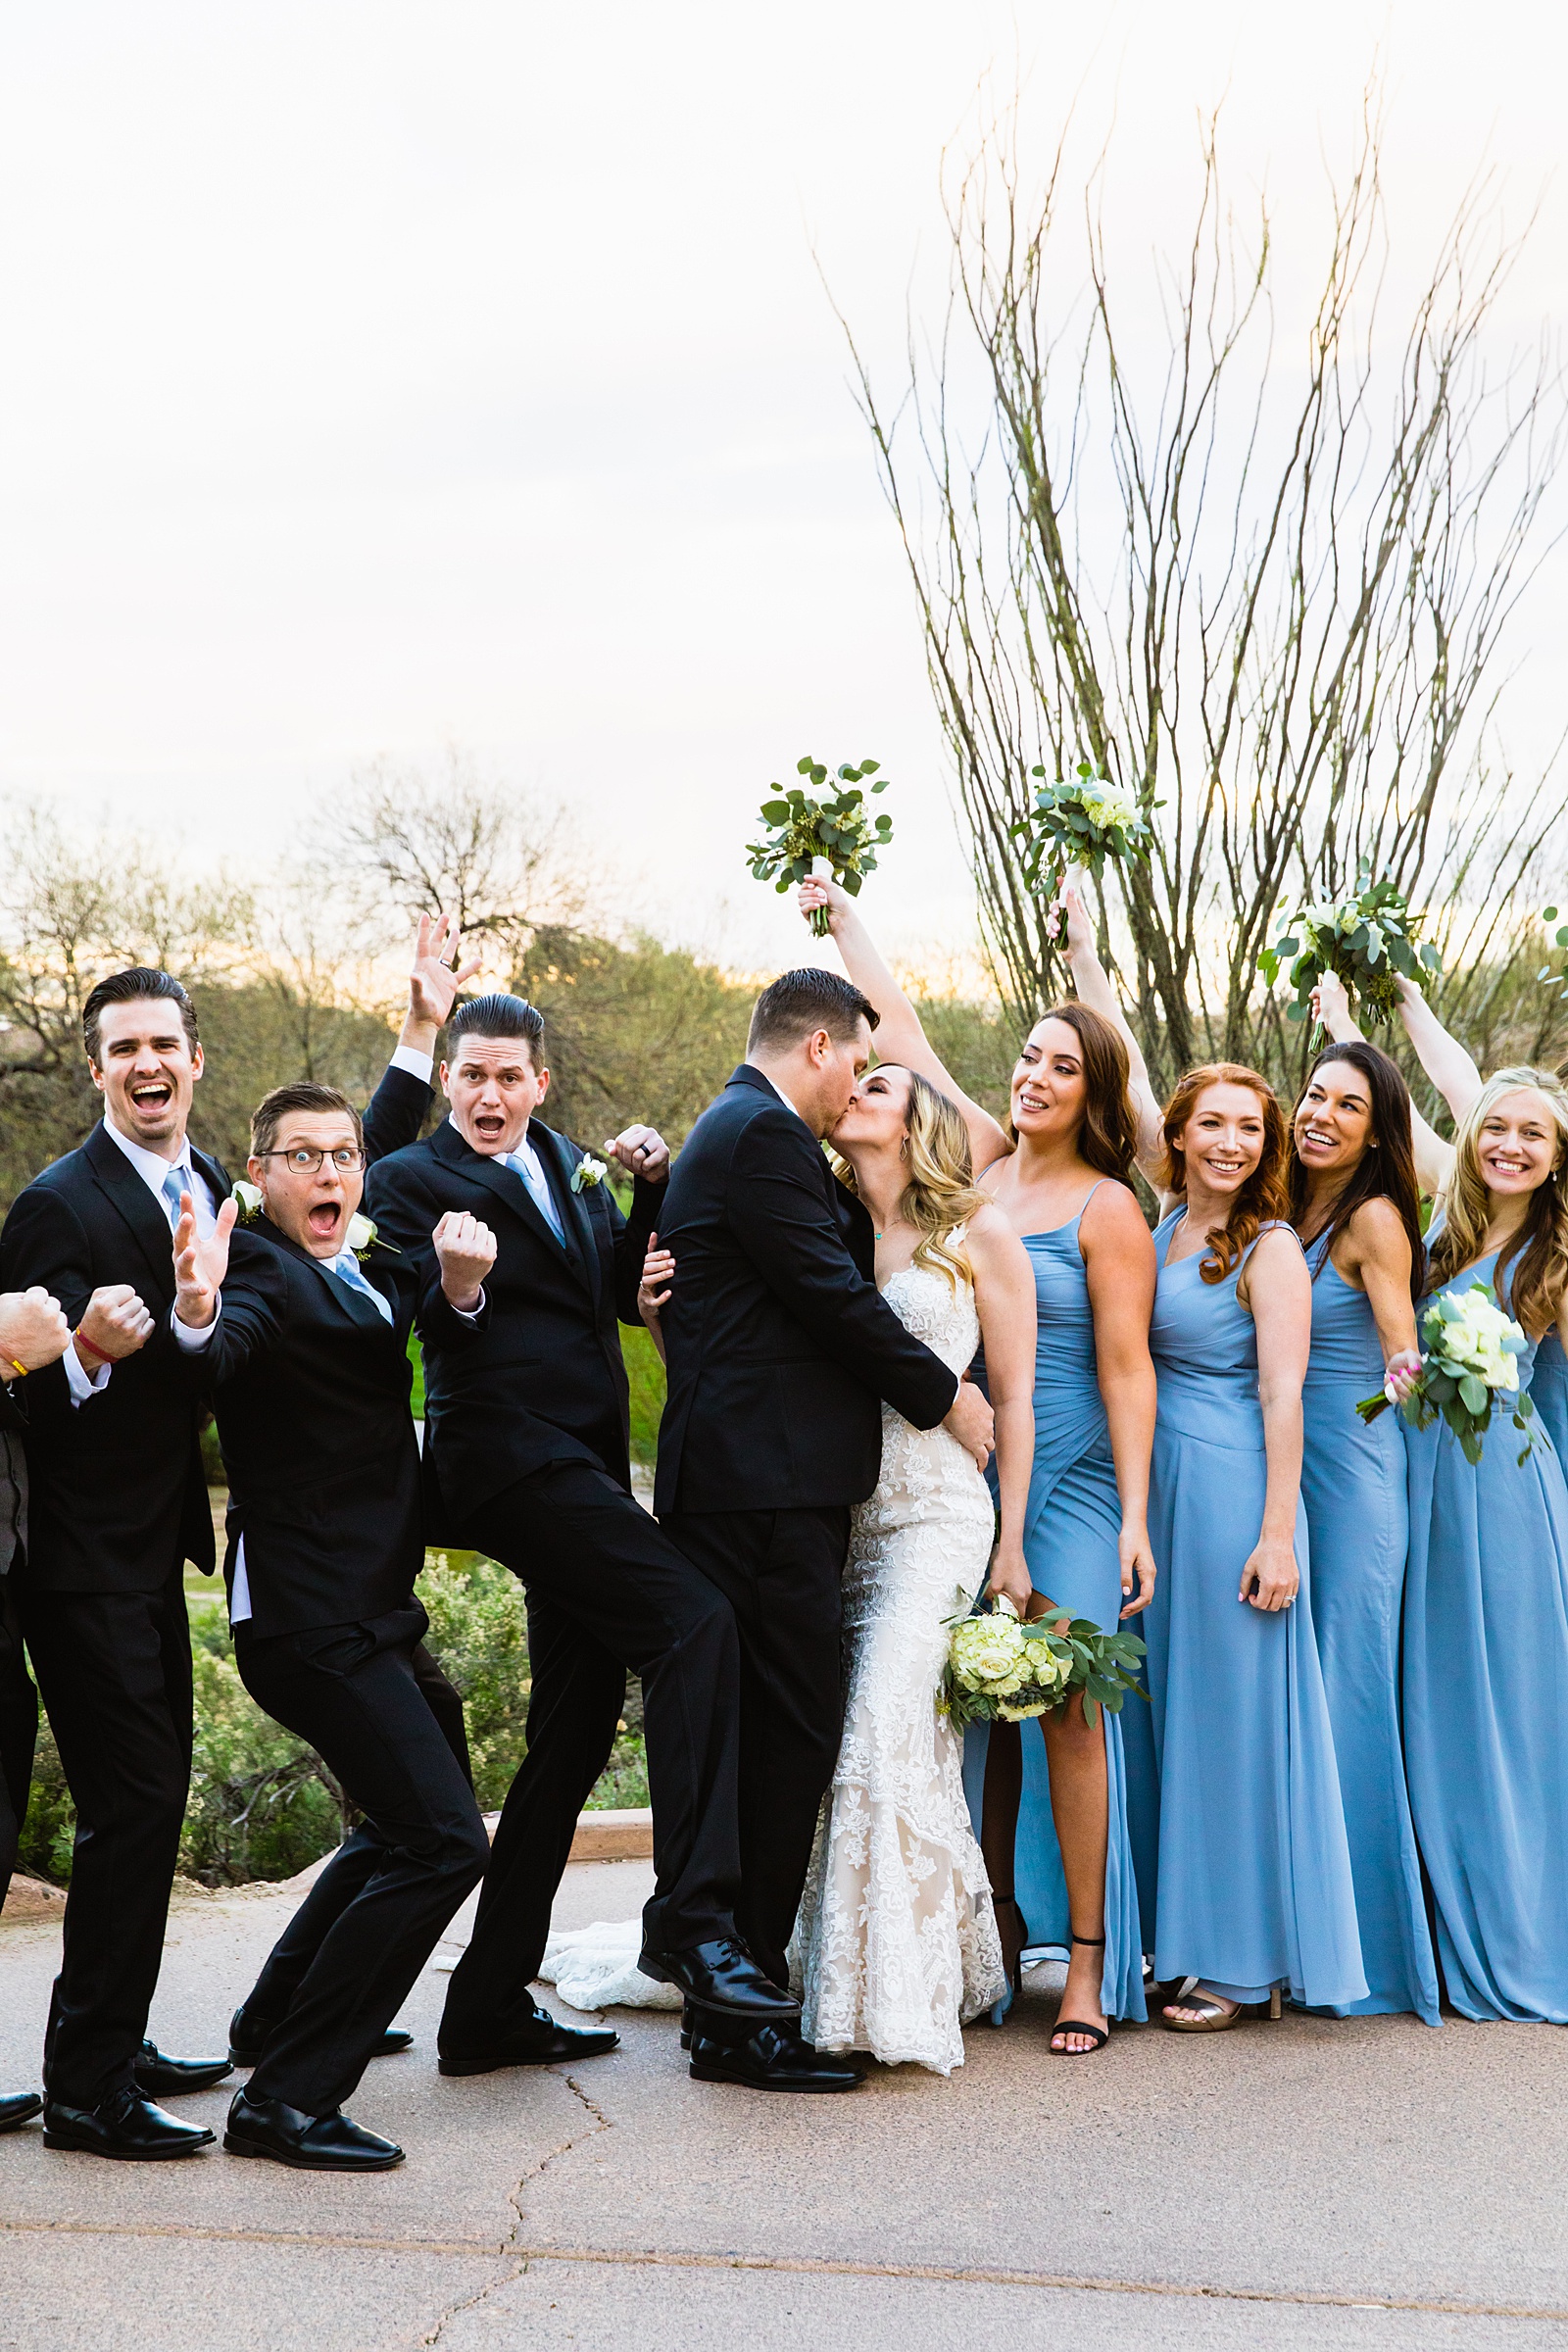 Bridal party having fun together at Troon North weding by Arizona wedding photographer PMA Photography.